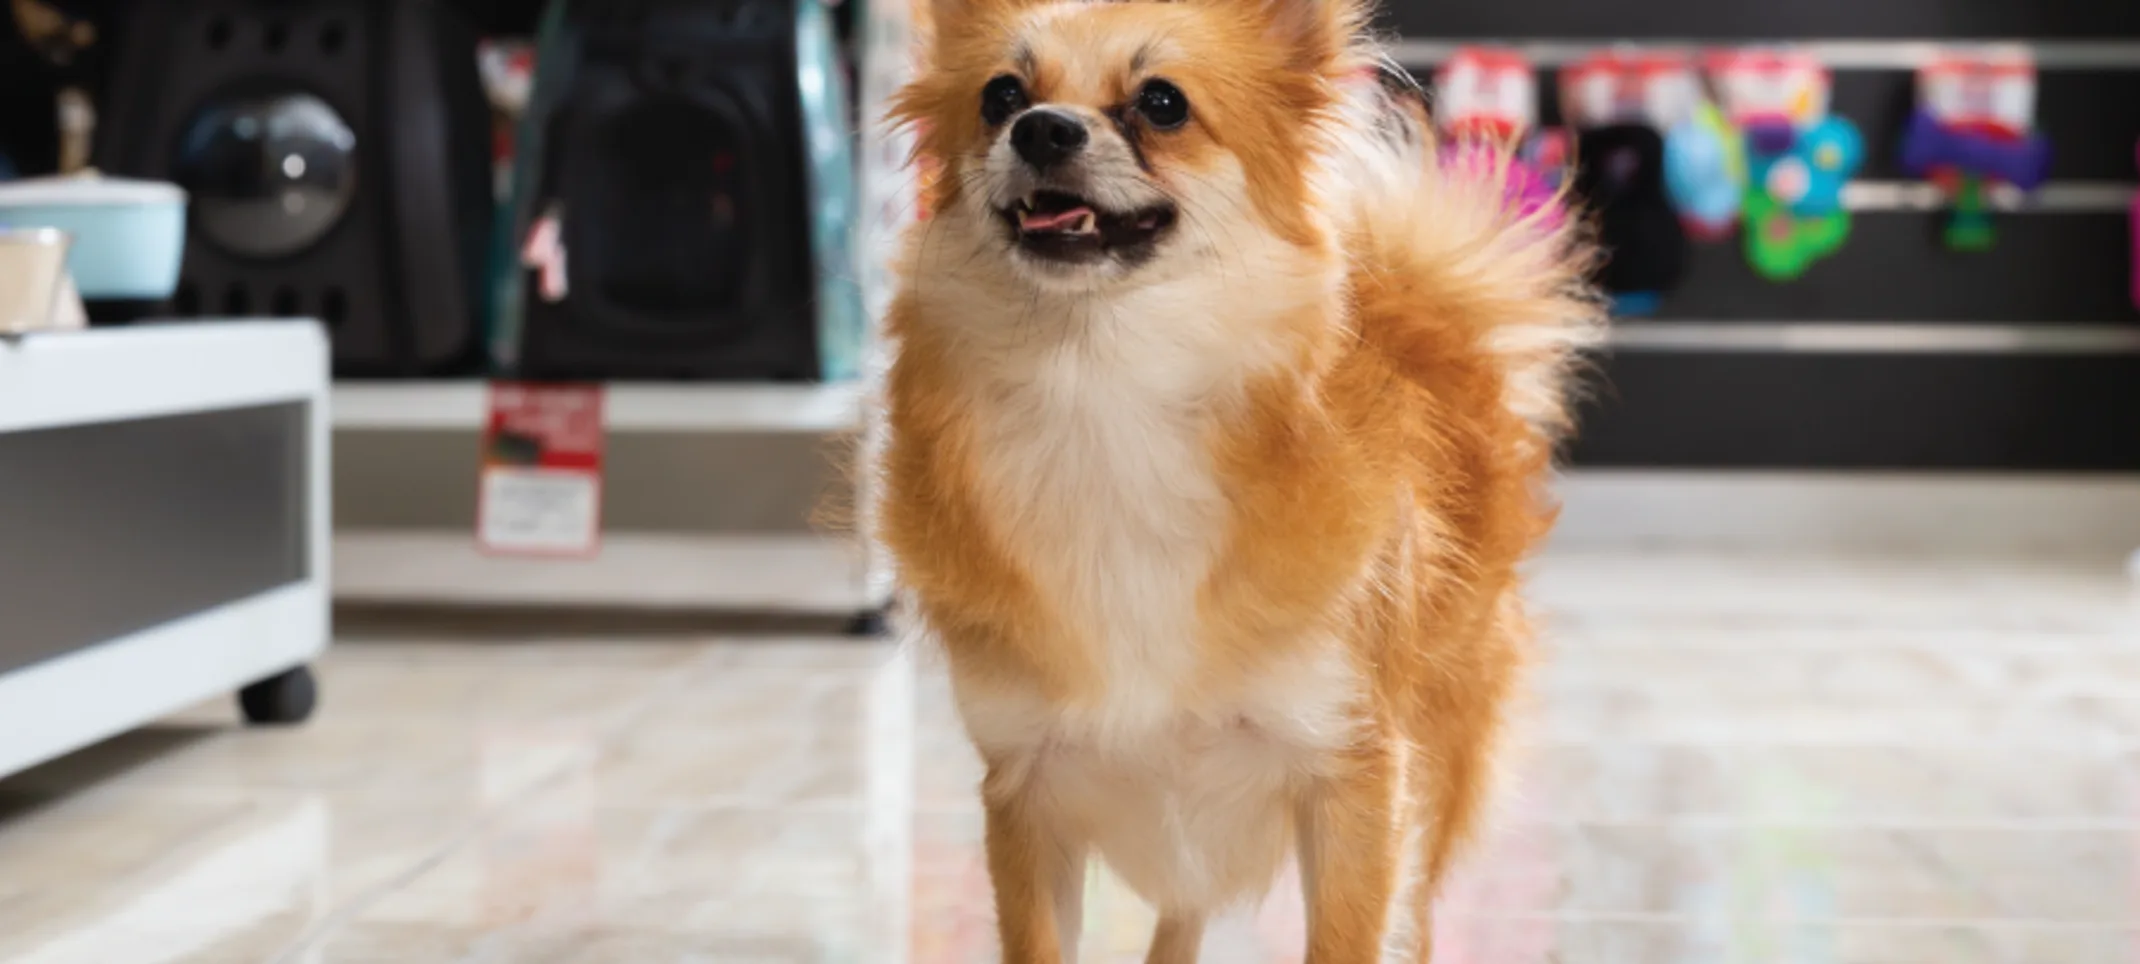 Small dog walking inside a store smiling up at the camera